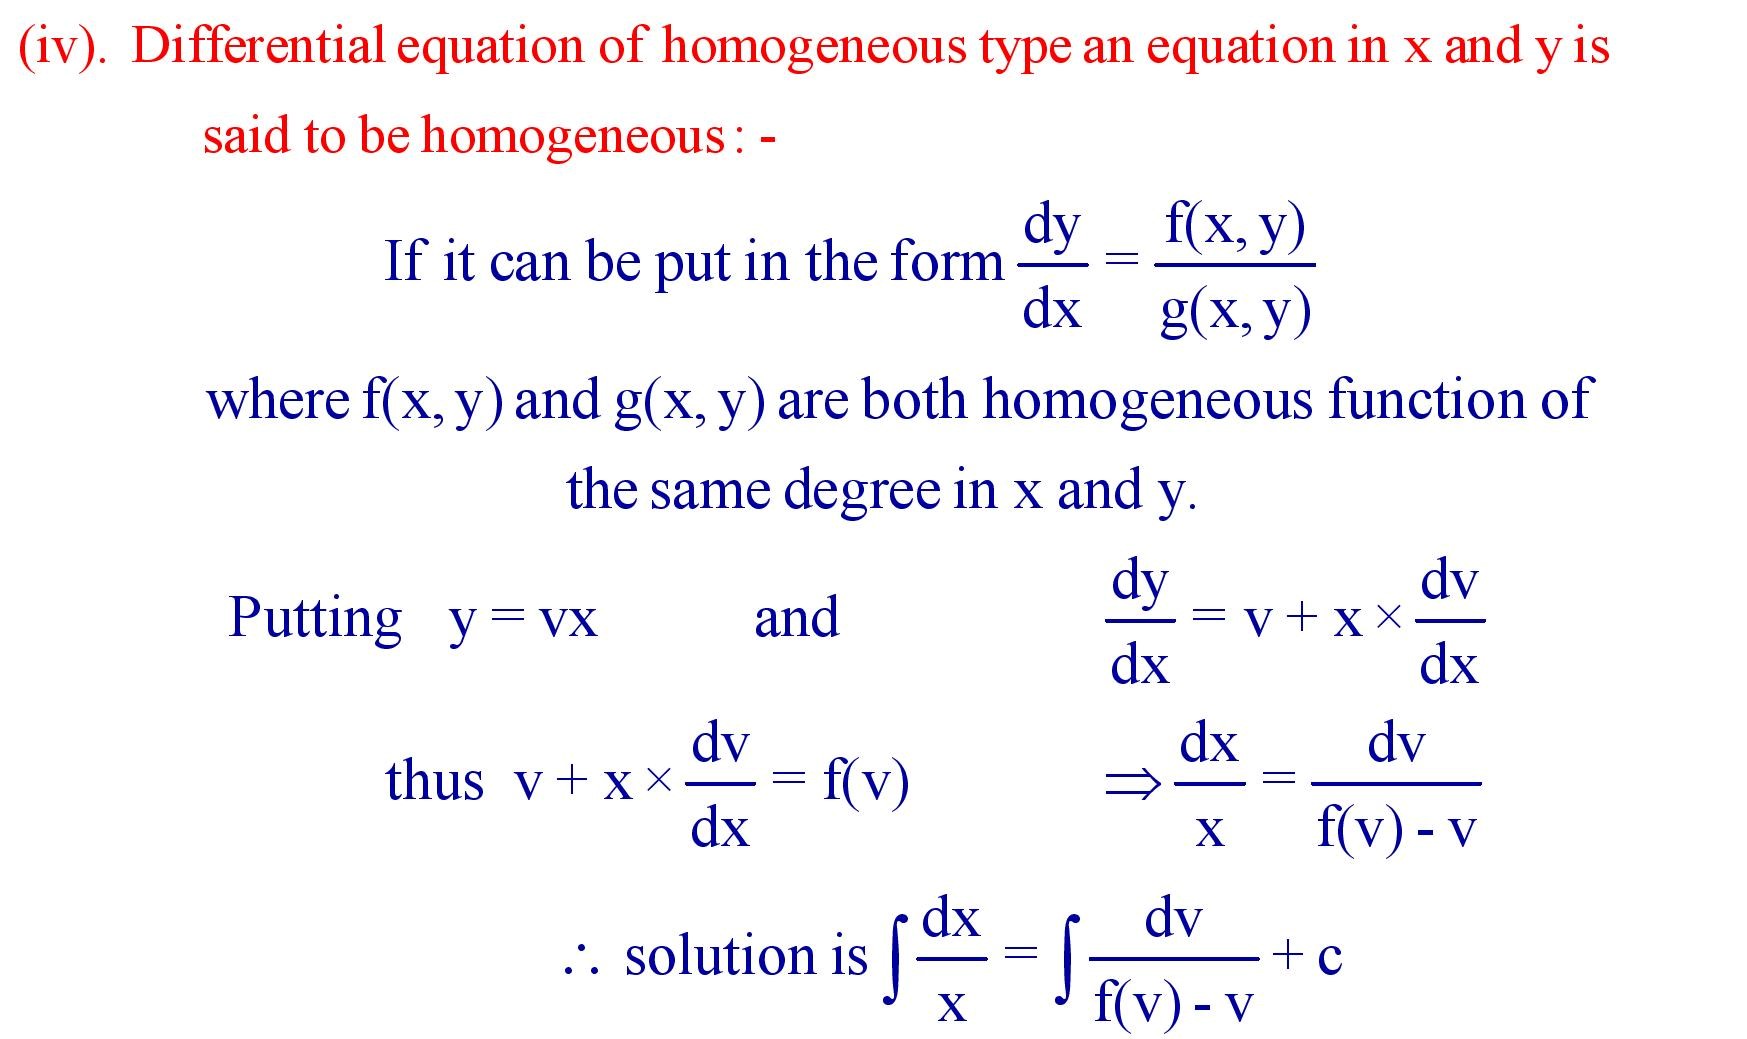 Differential equation of homogeneous type an equation in x and y is said to be homogeneous